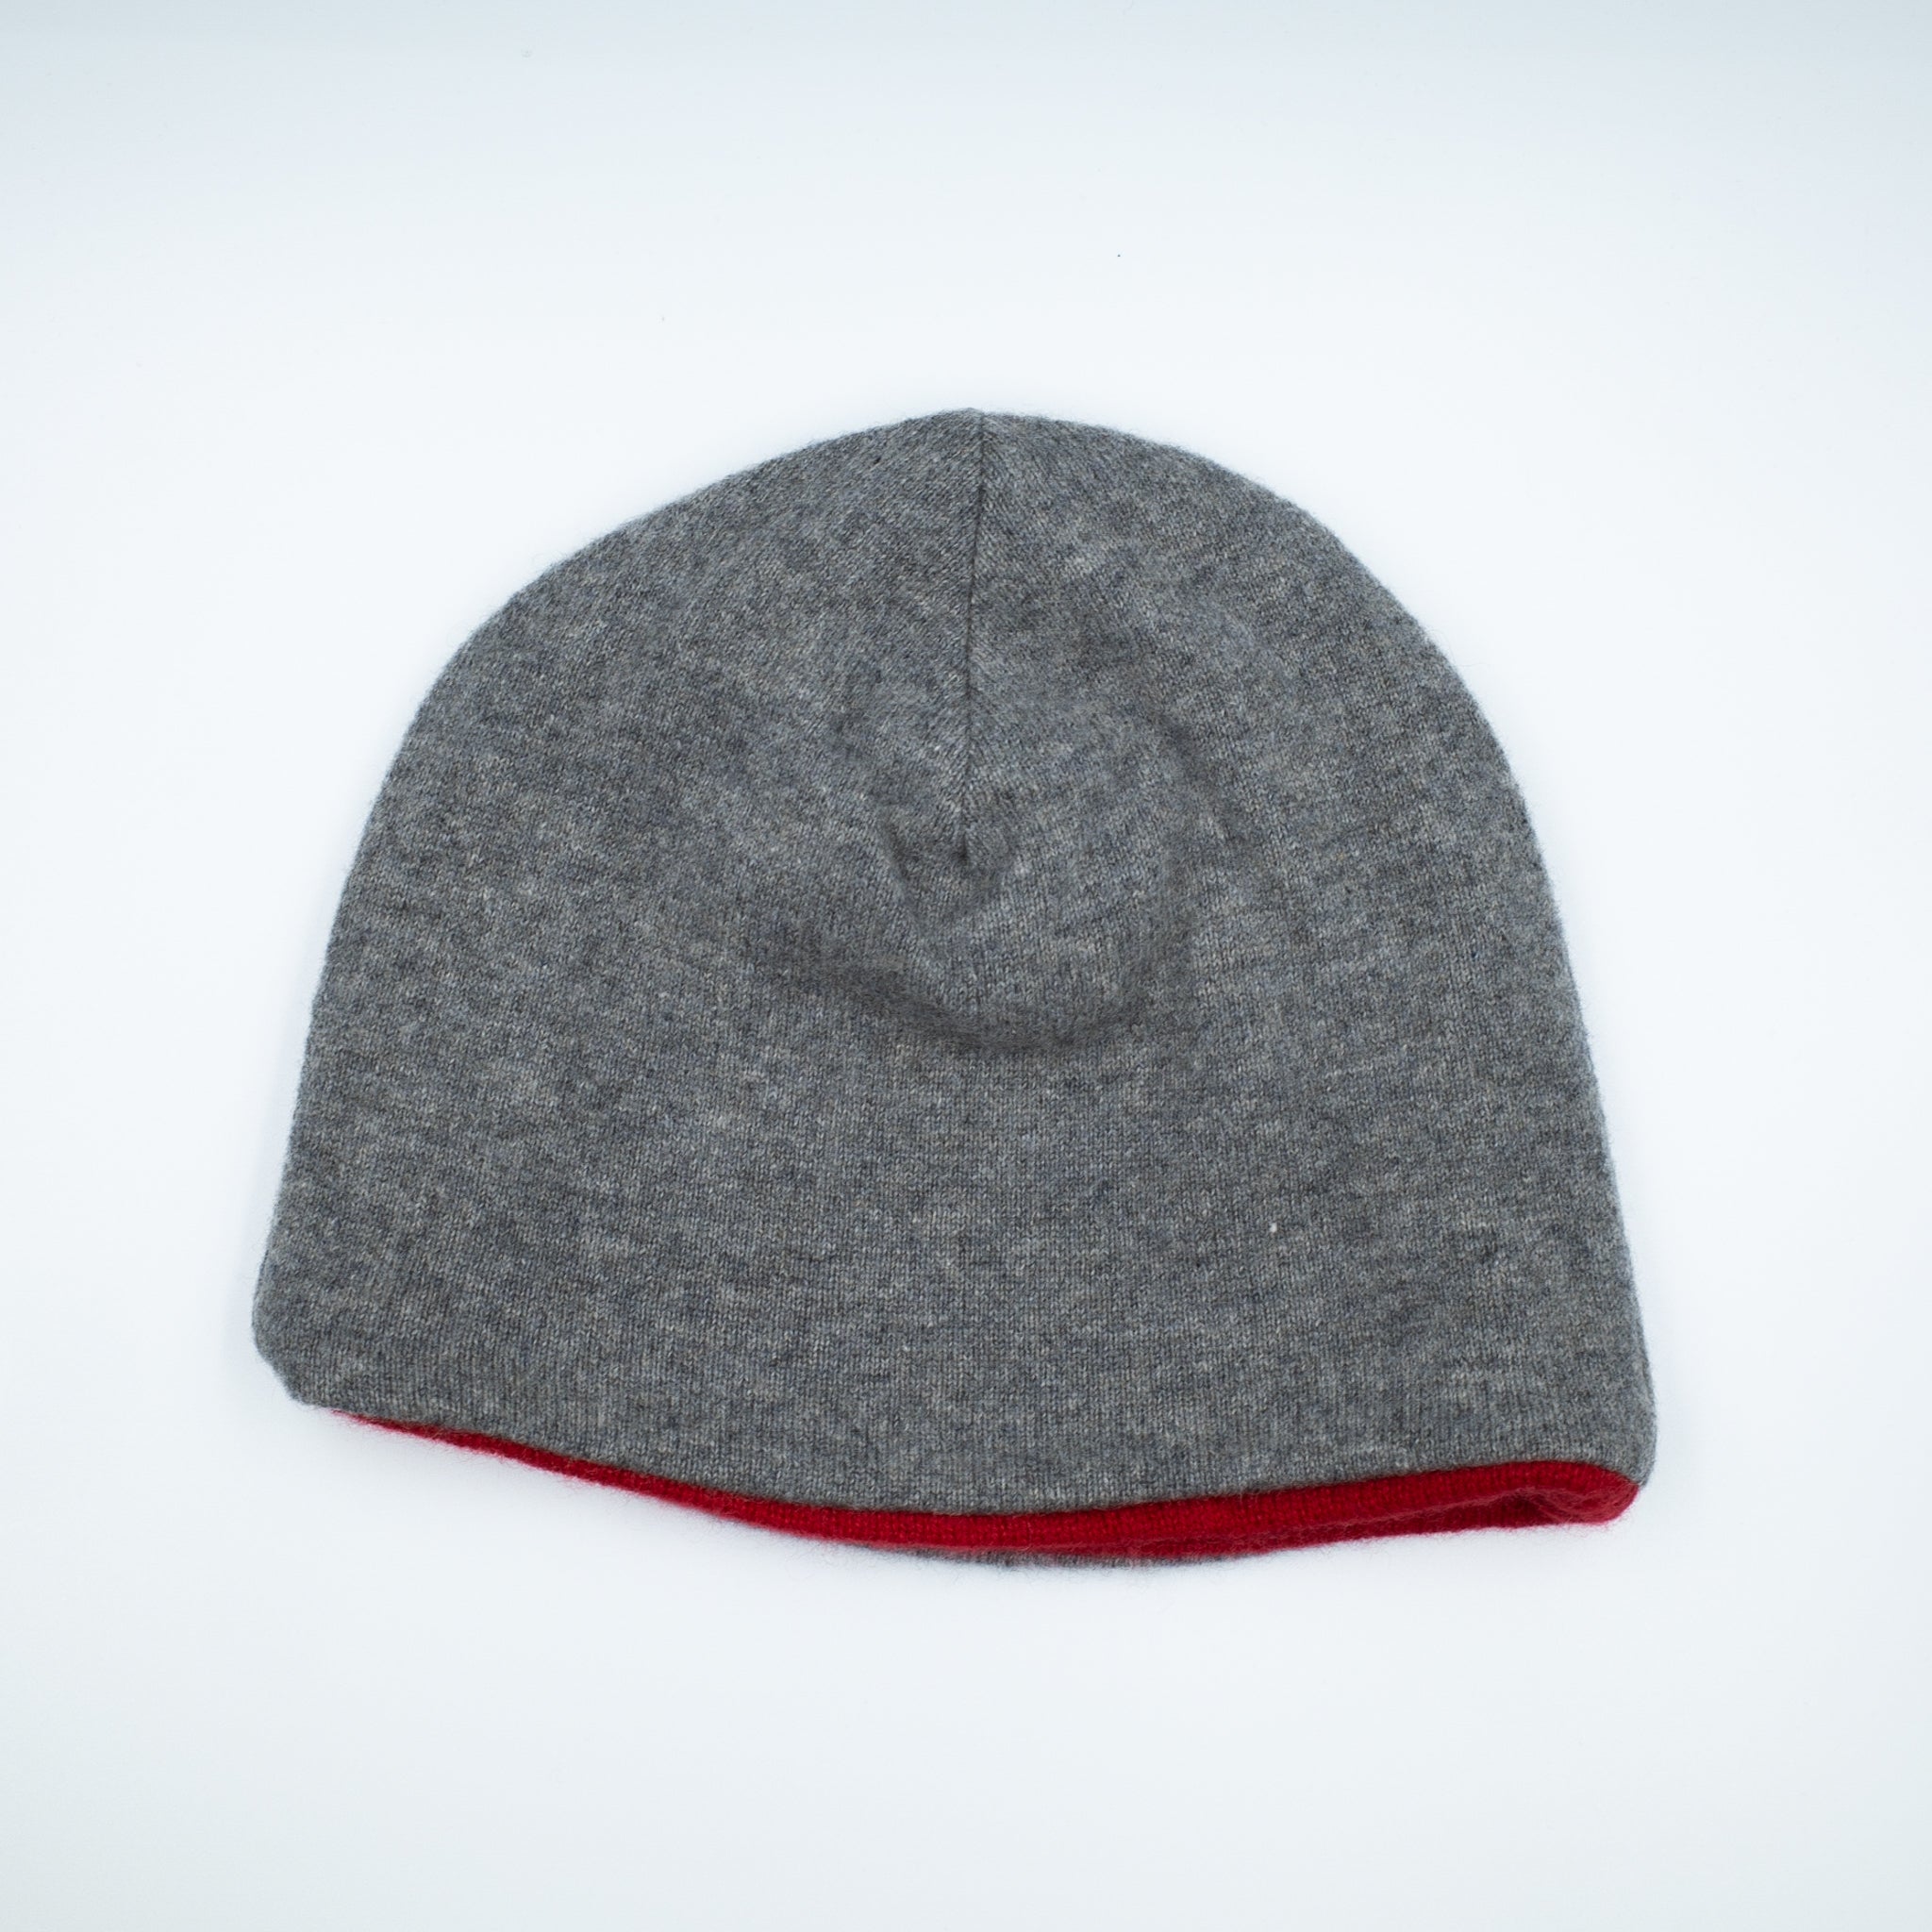 Smoke Grey and Post Box Red Cashmere Beanie Hat